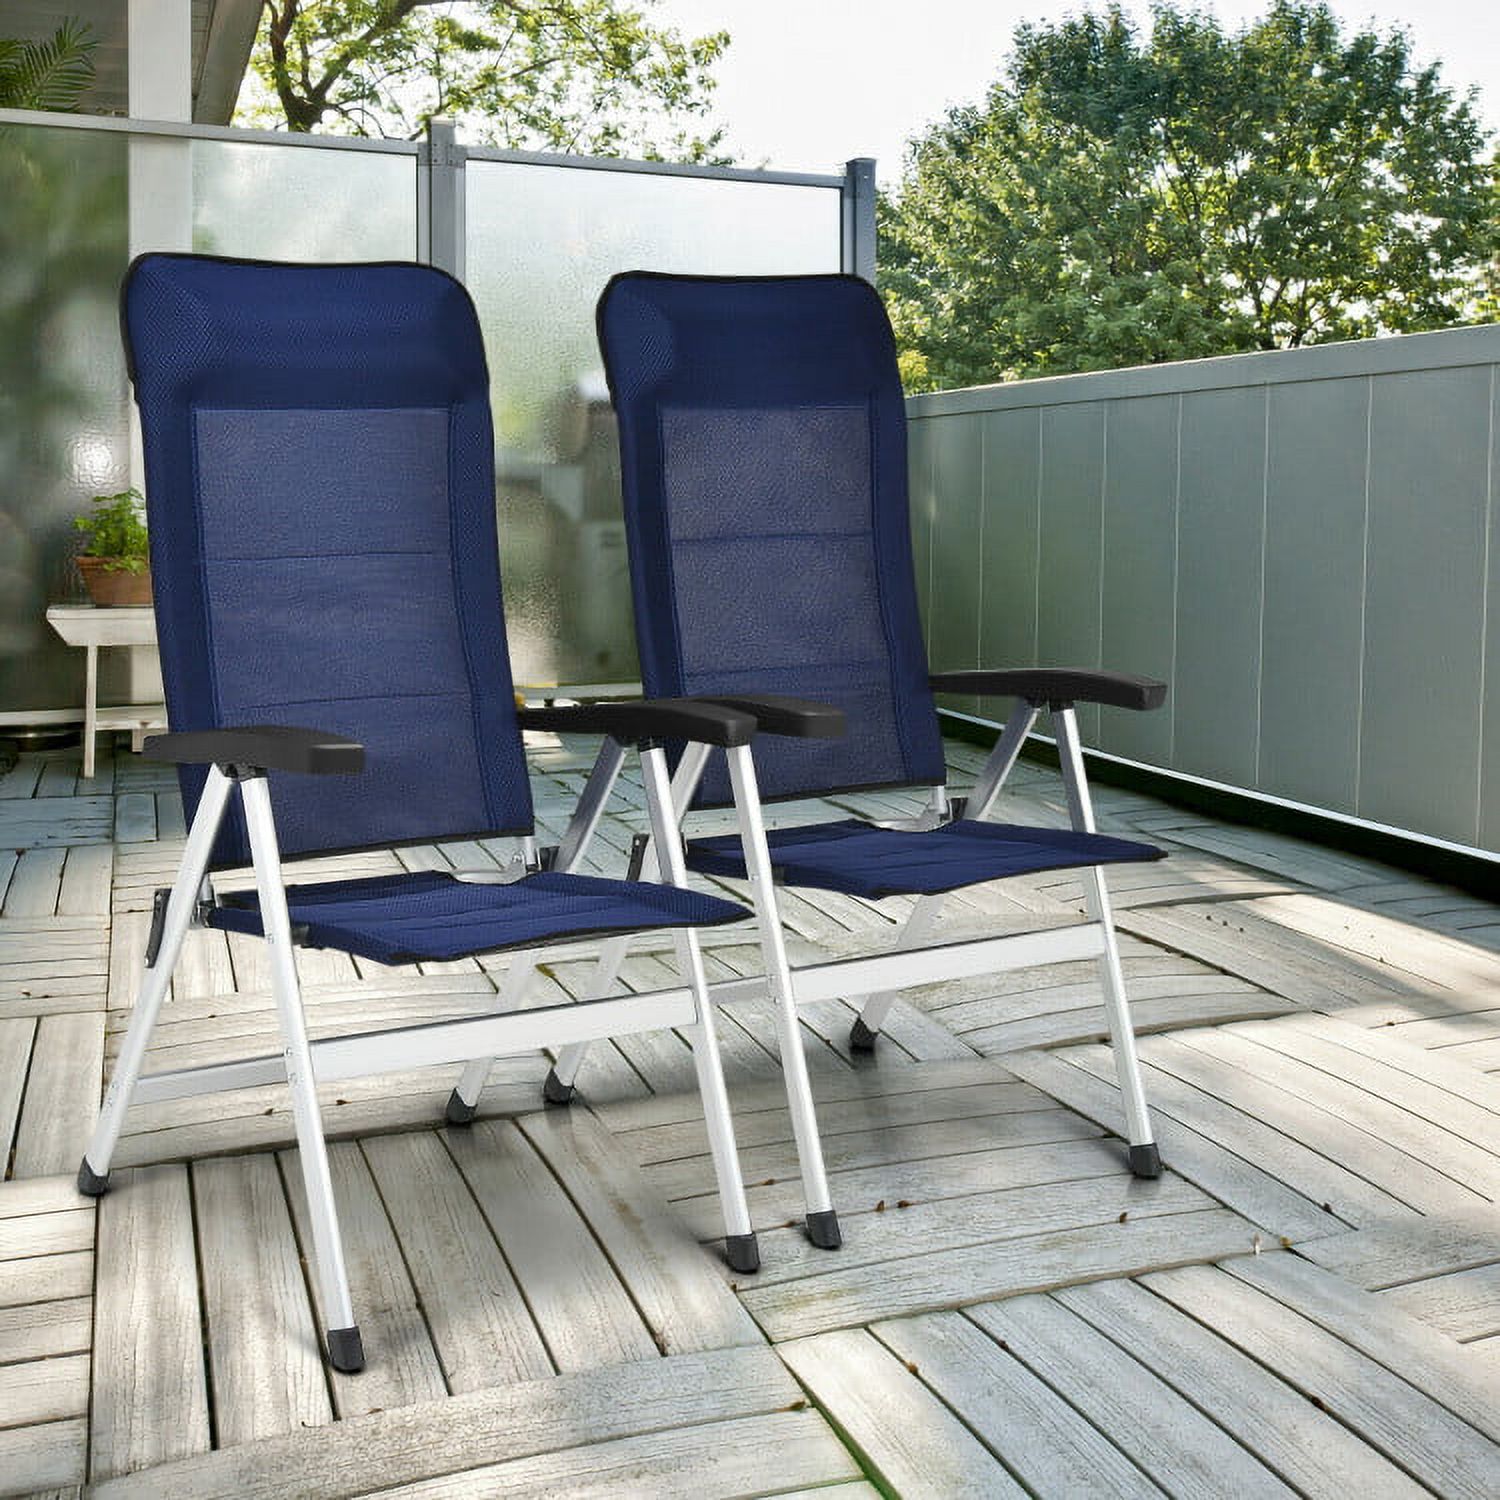 2 Pieces Patio Dining Chair with Adjust Portable Headrest - image 3 of 6